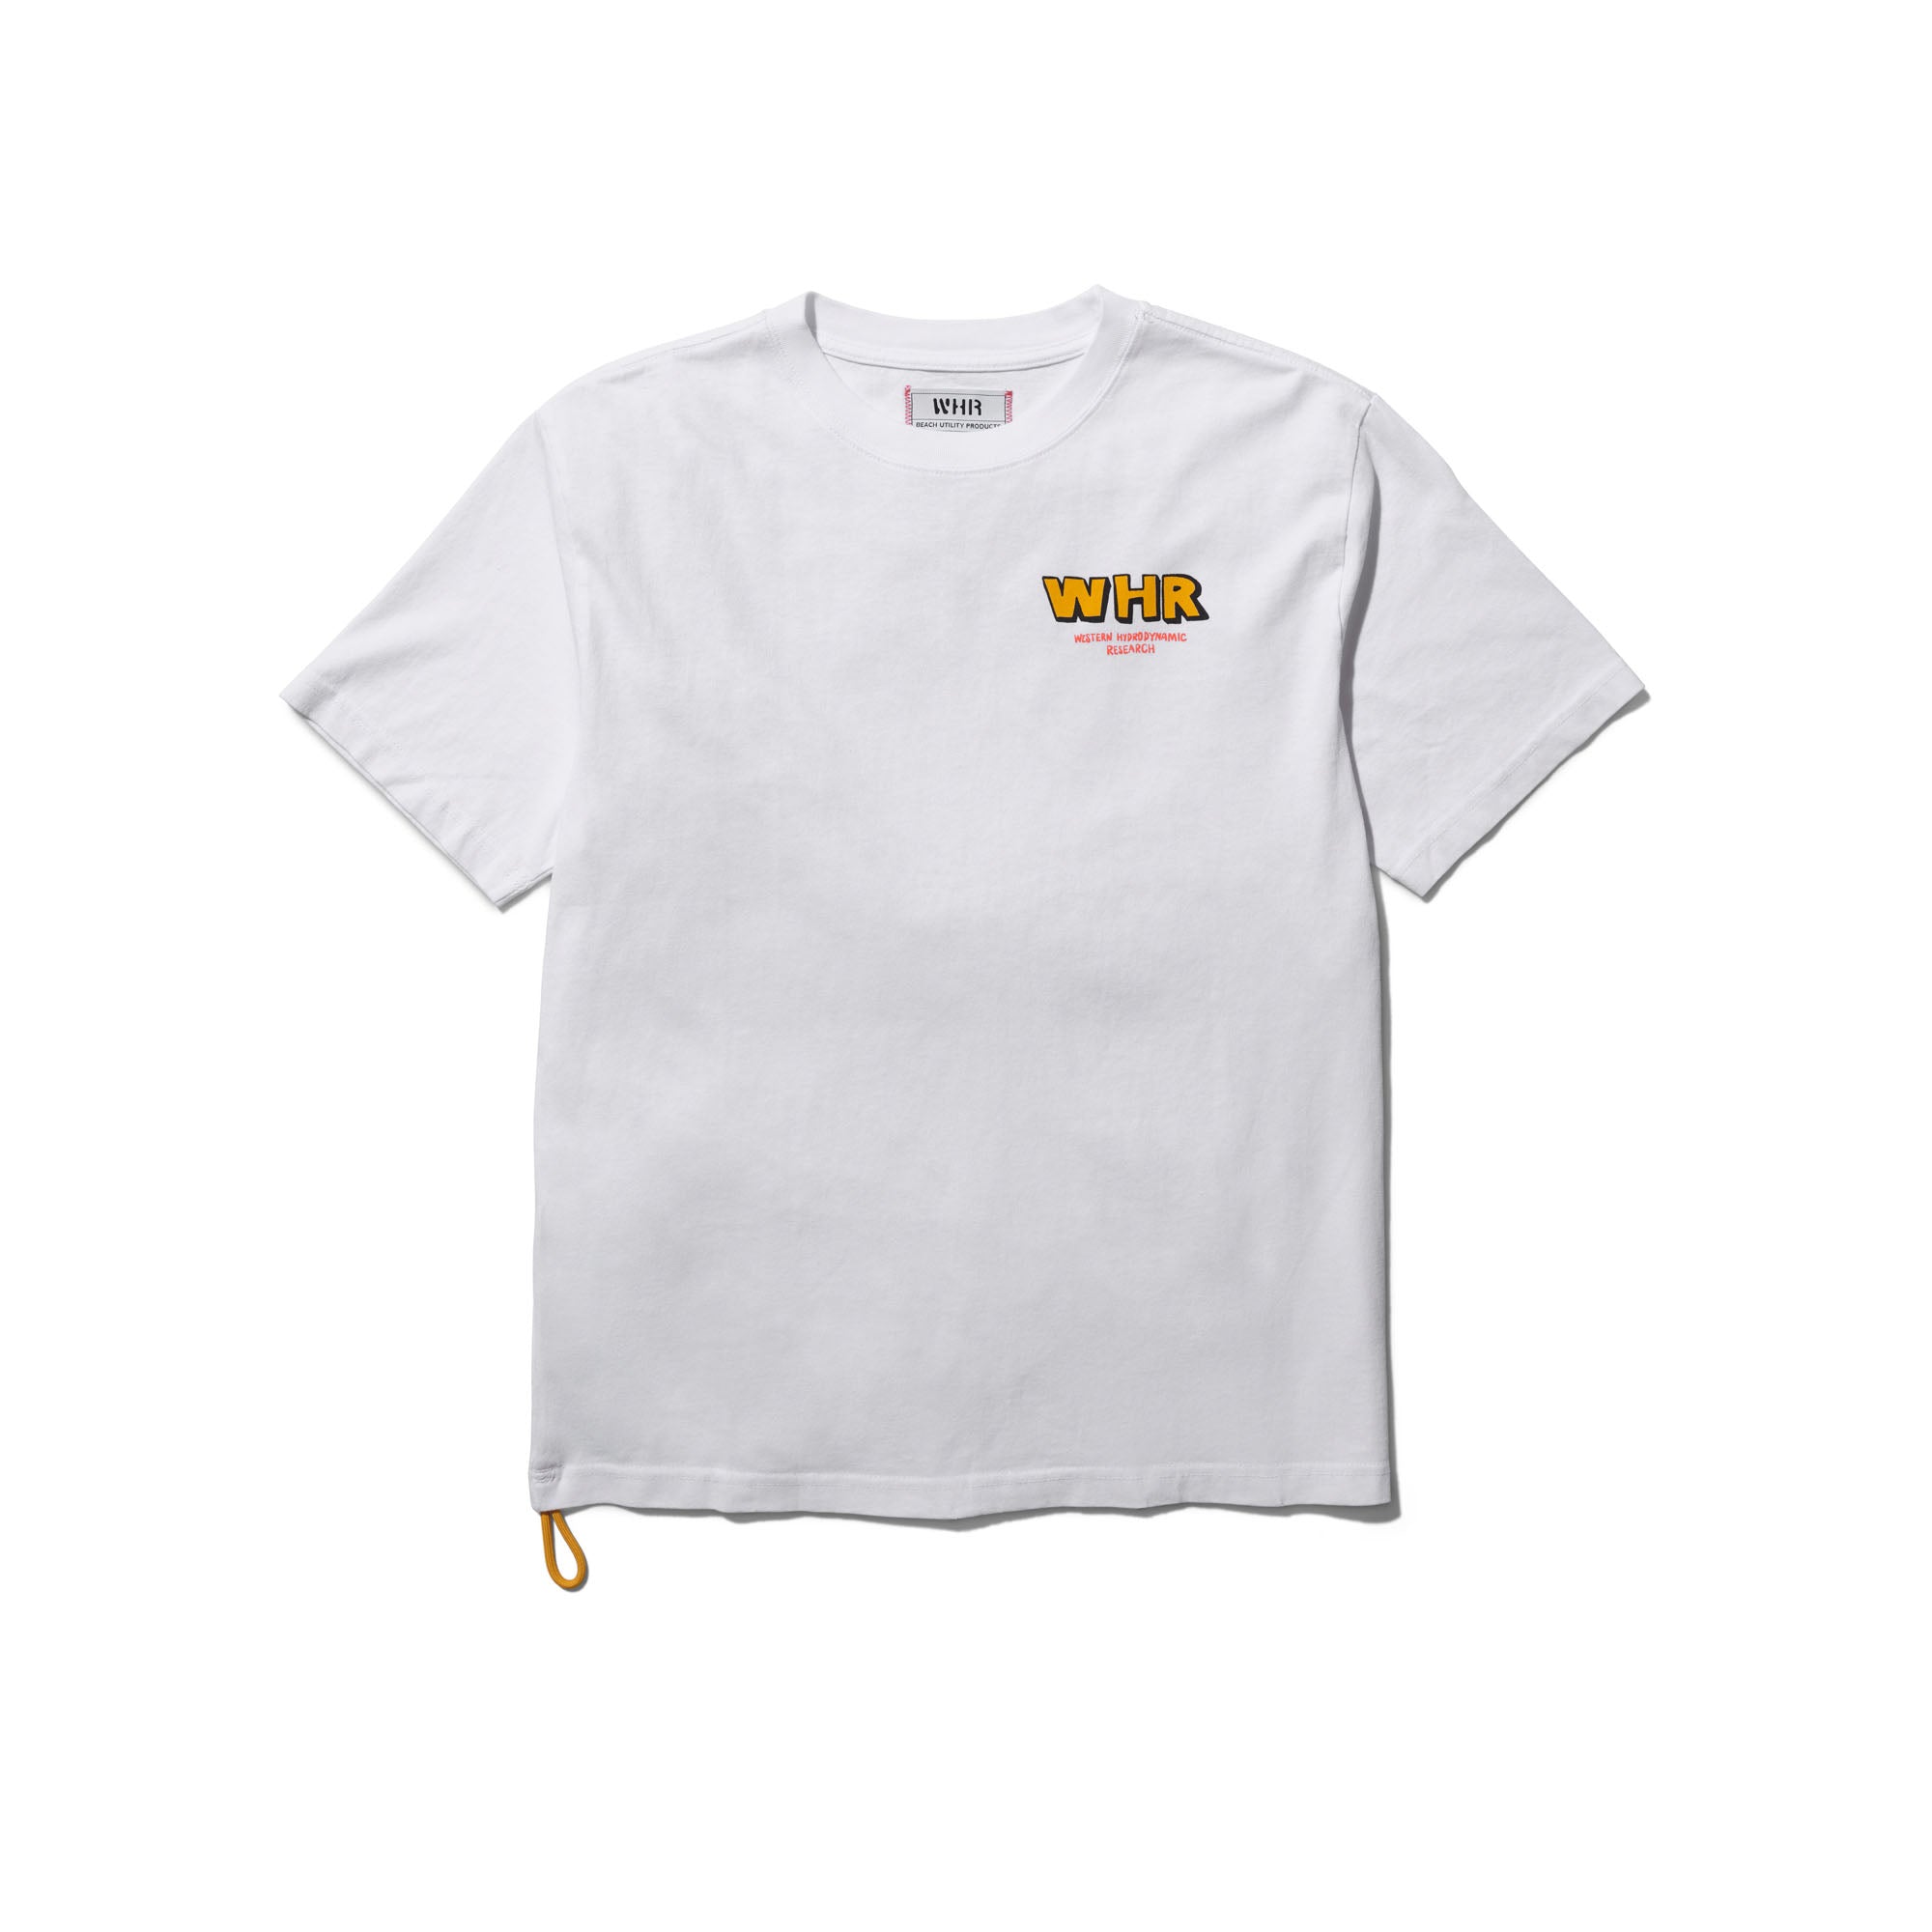 Wobbly Worker Tee (White)